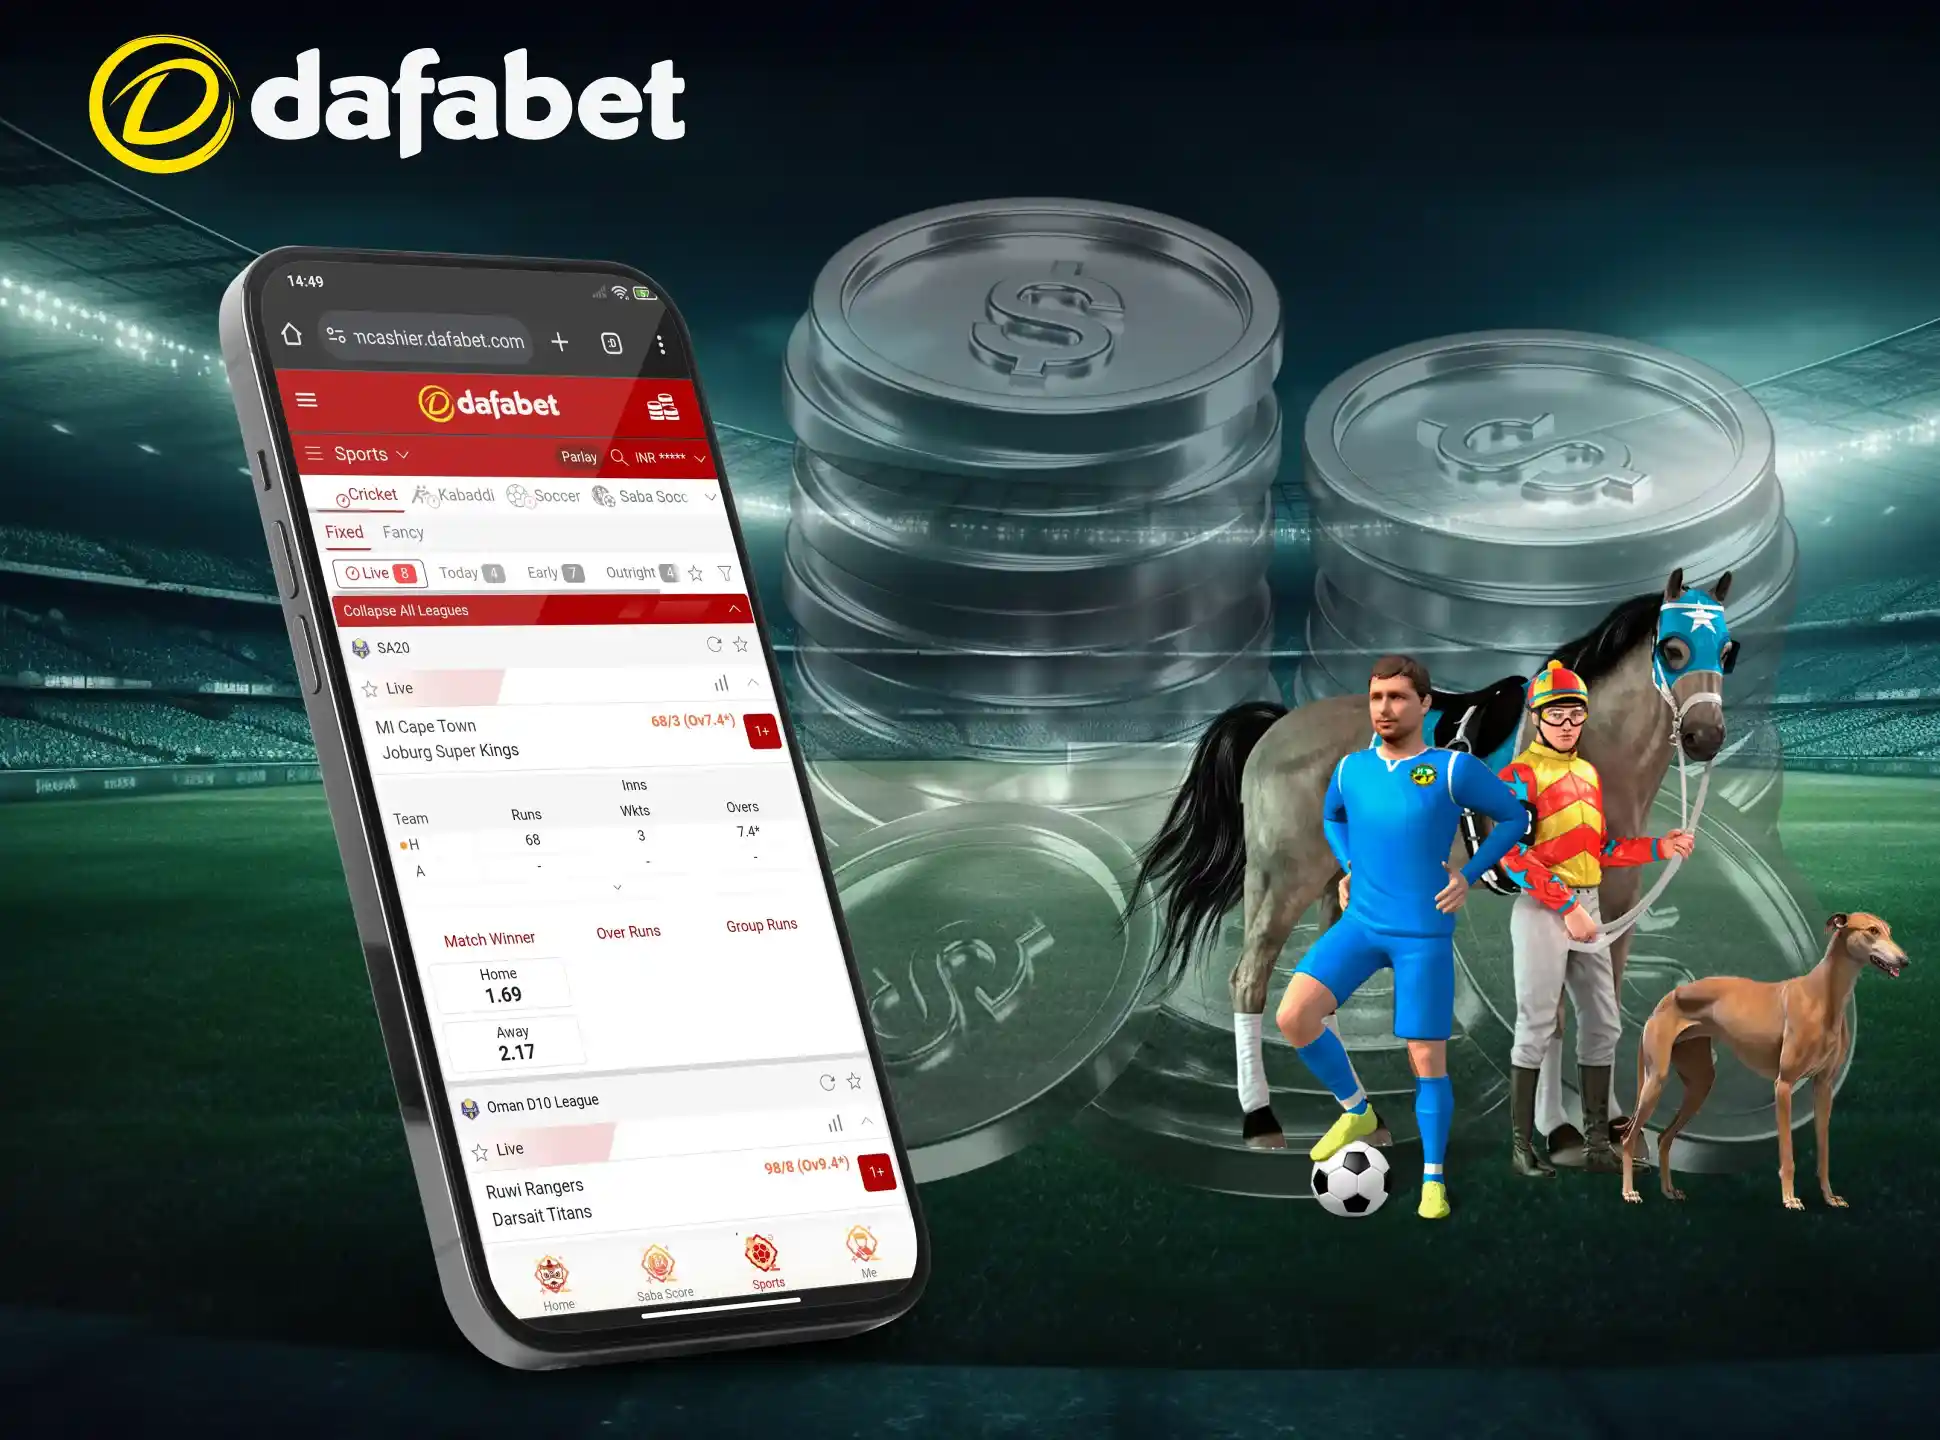 To start betting, log in to your Dafabet account and make your first deposit.